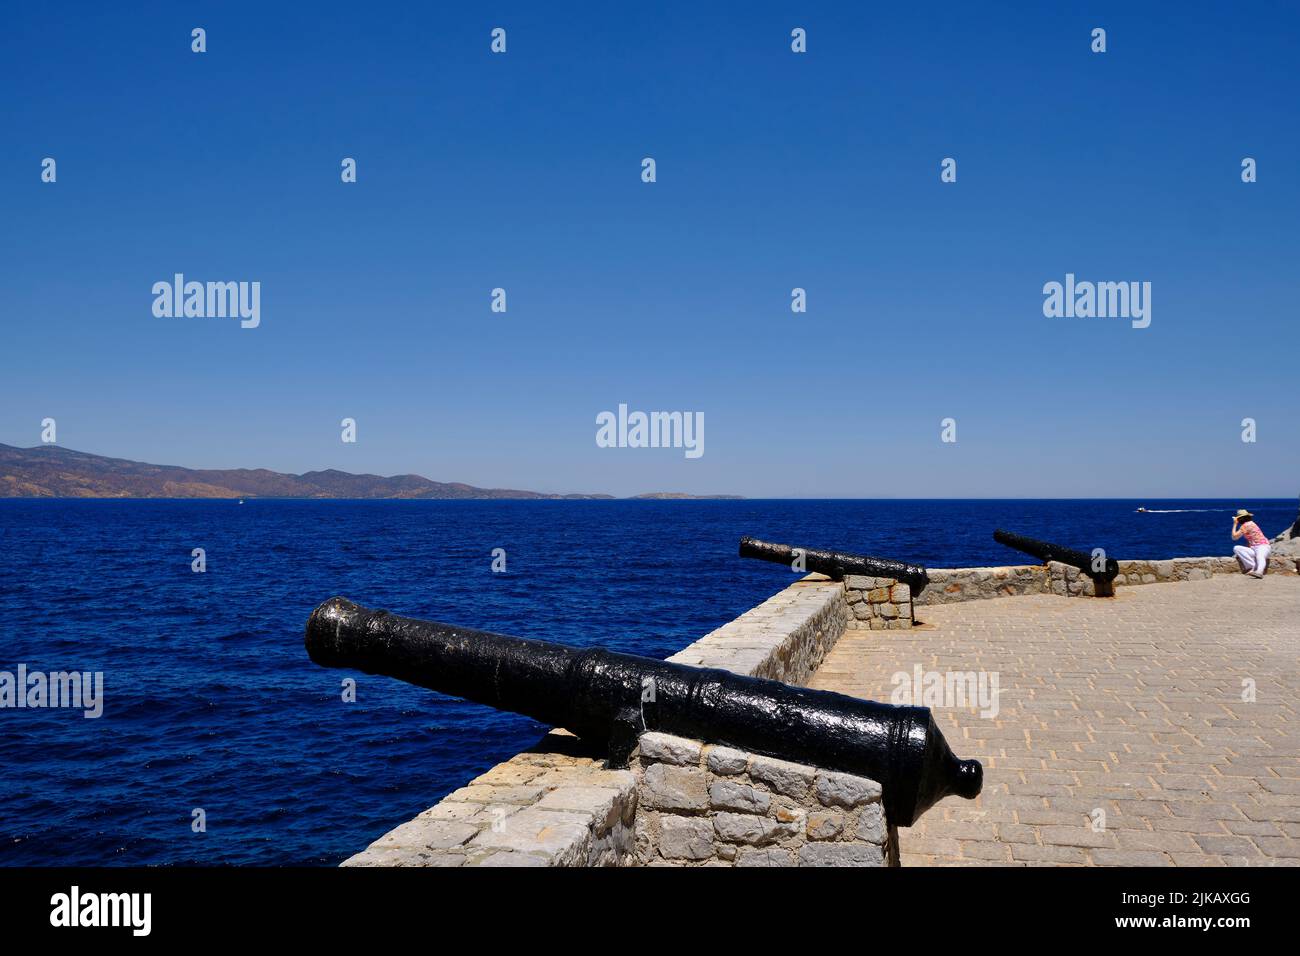 Cannons on the island of Hydra in Greece Stock Photo